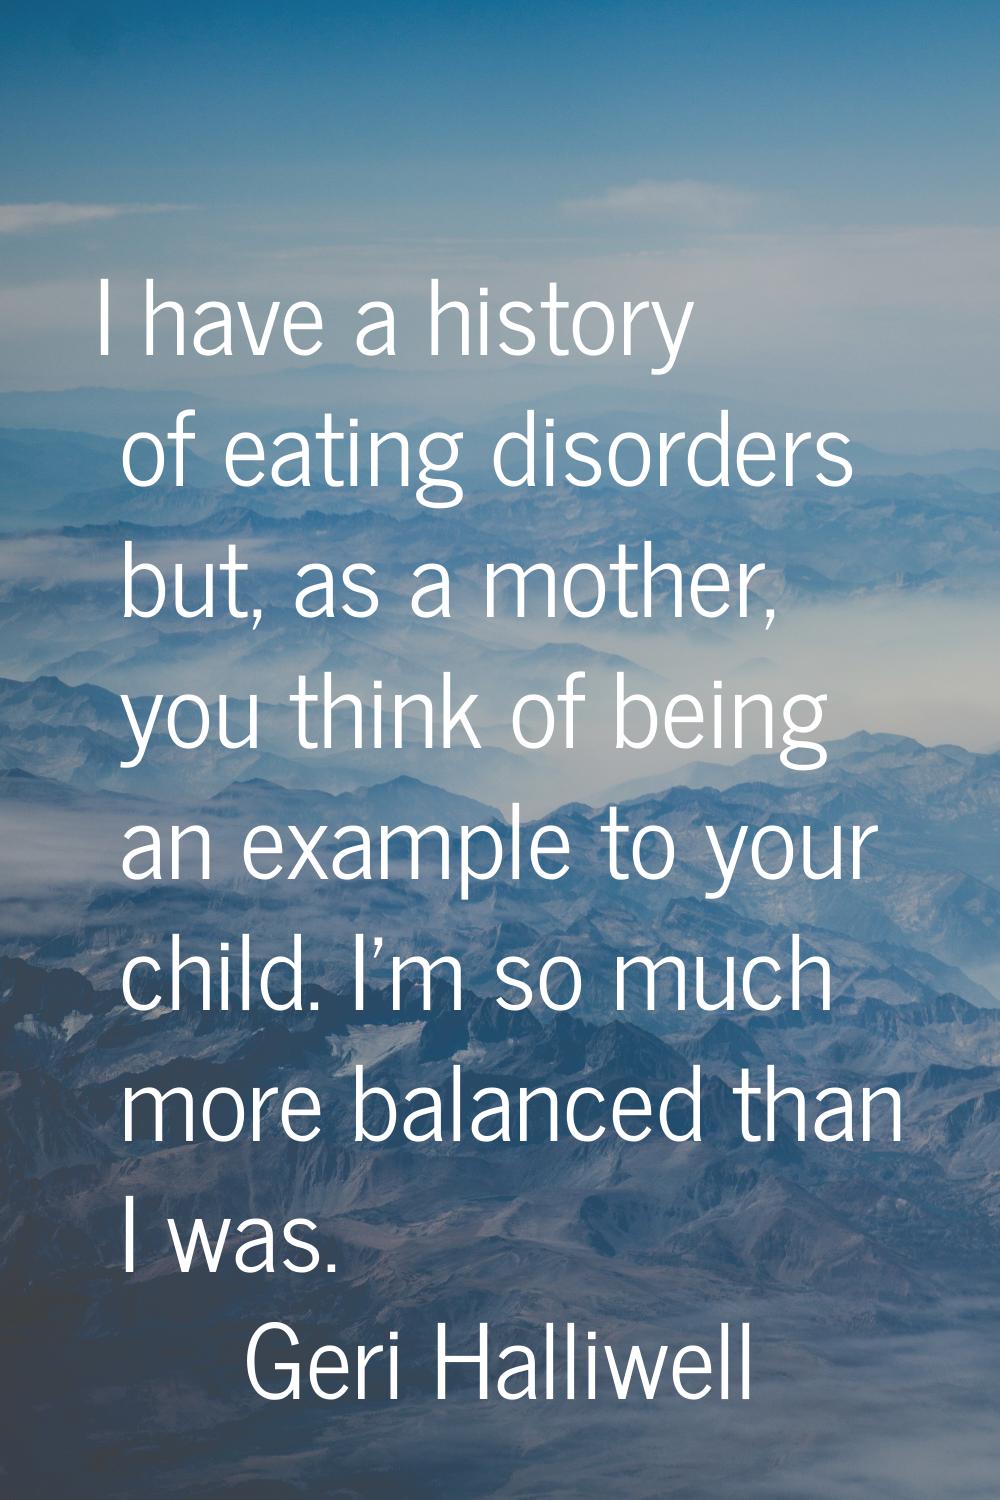 I have a history of eating disorders but, as a mother, you think of being an example to your child.